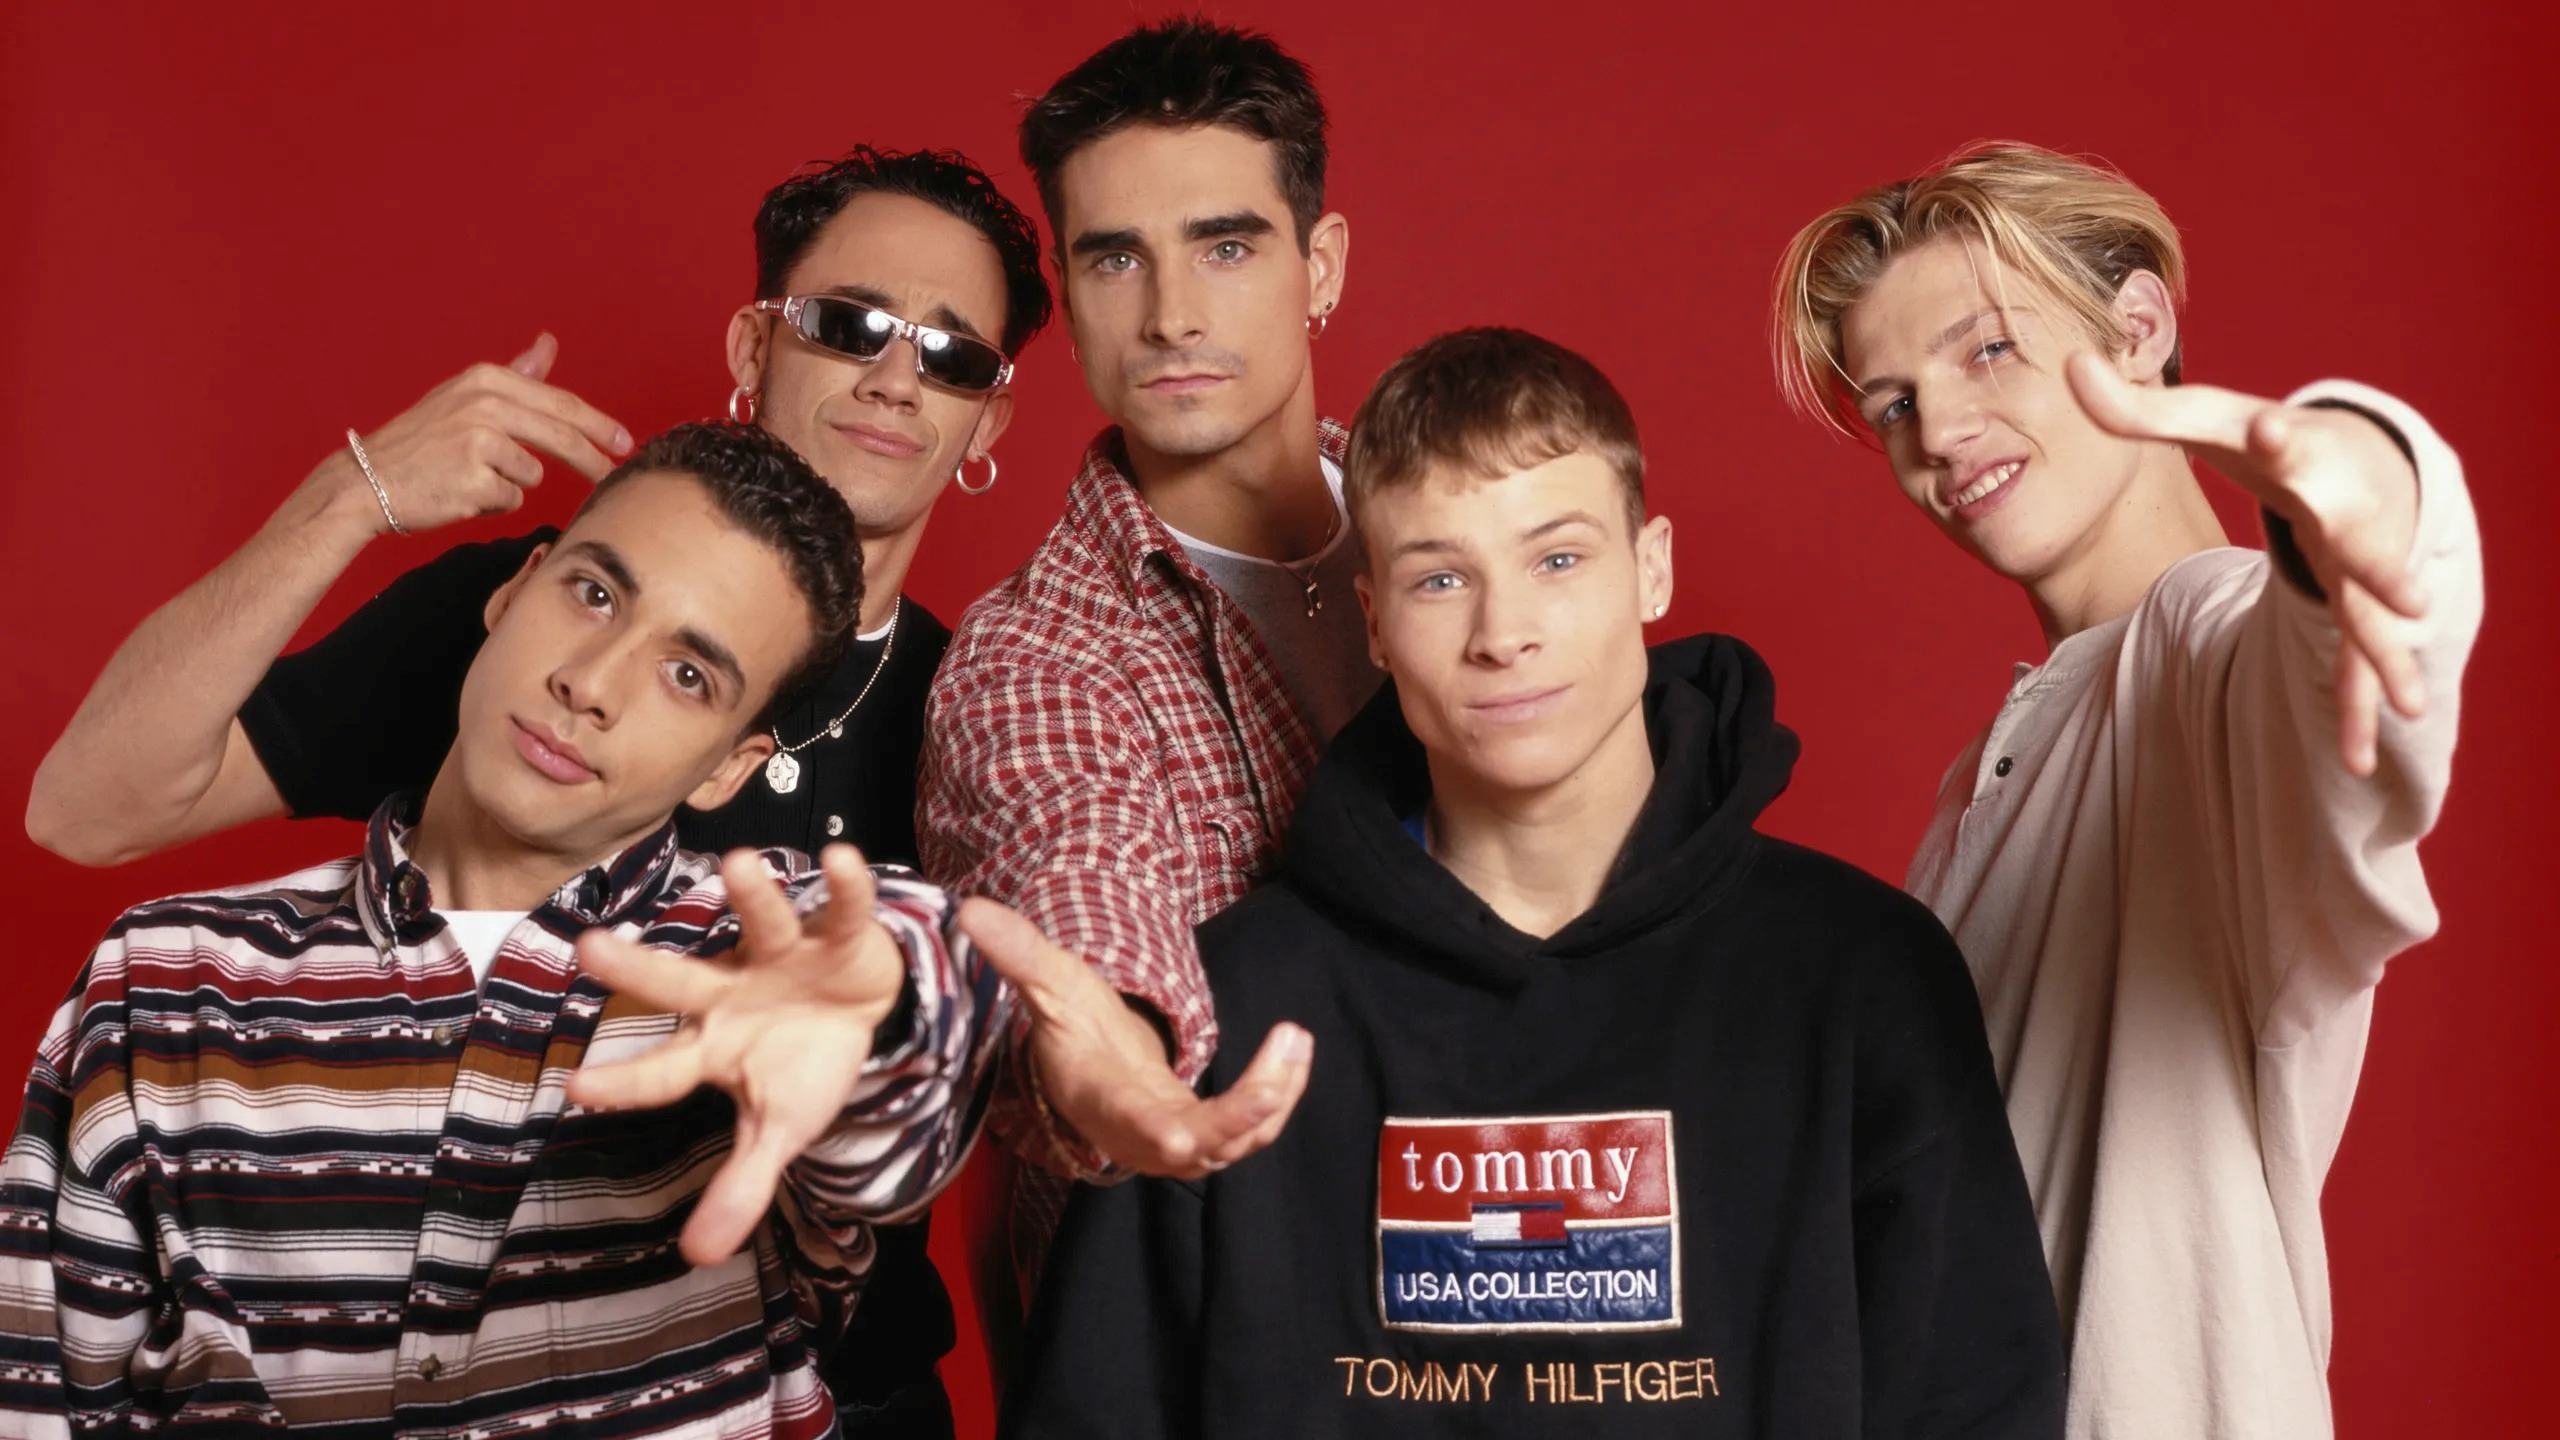 21 Extraordinary Facts About The Backstreet Boys - Facts.net